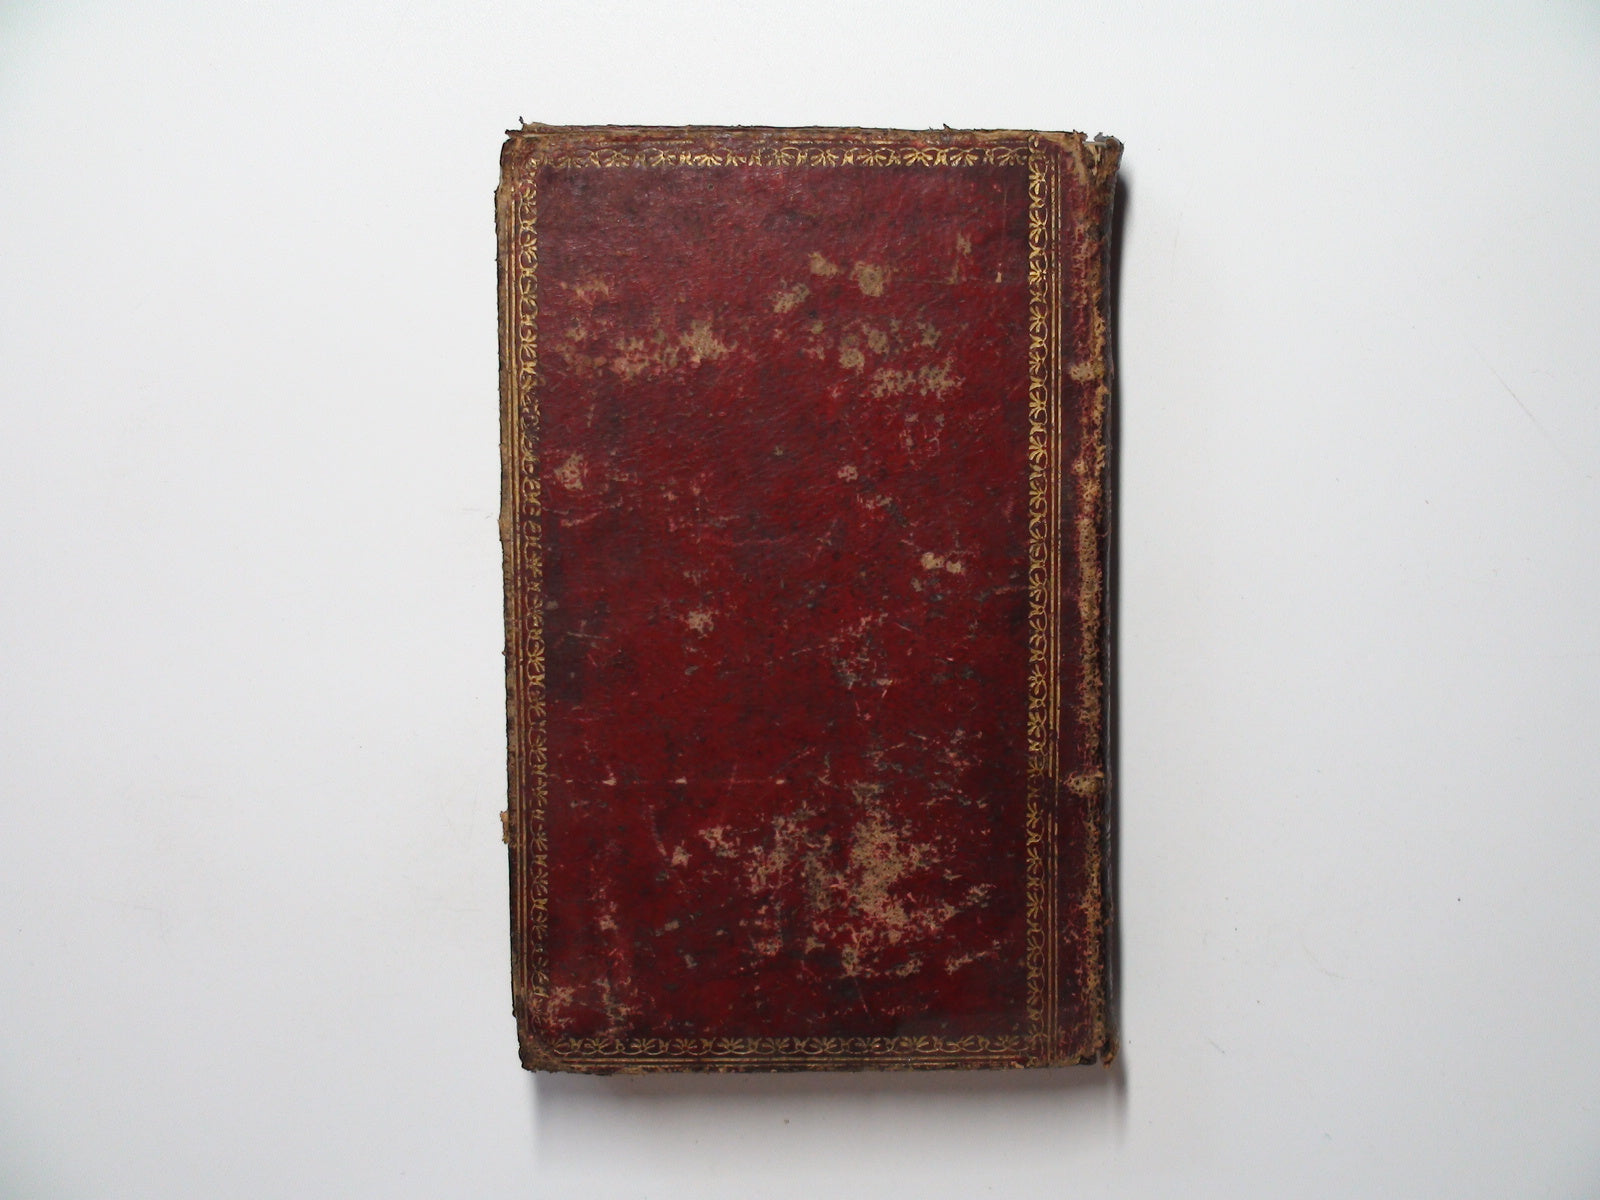 The Book of Common Prayer, Protestant Episcopal Church, Rare, Leather, 1816